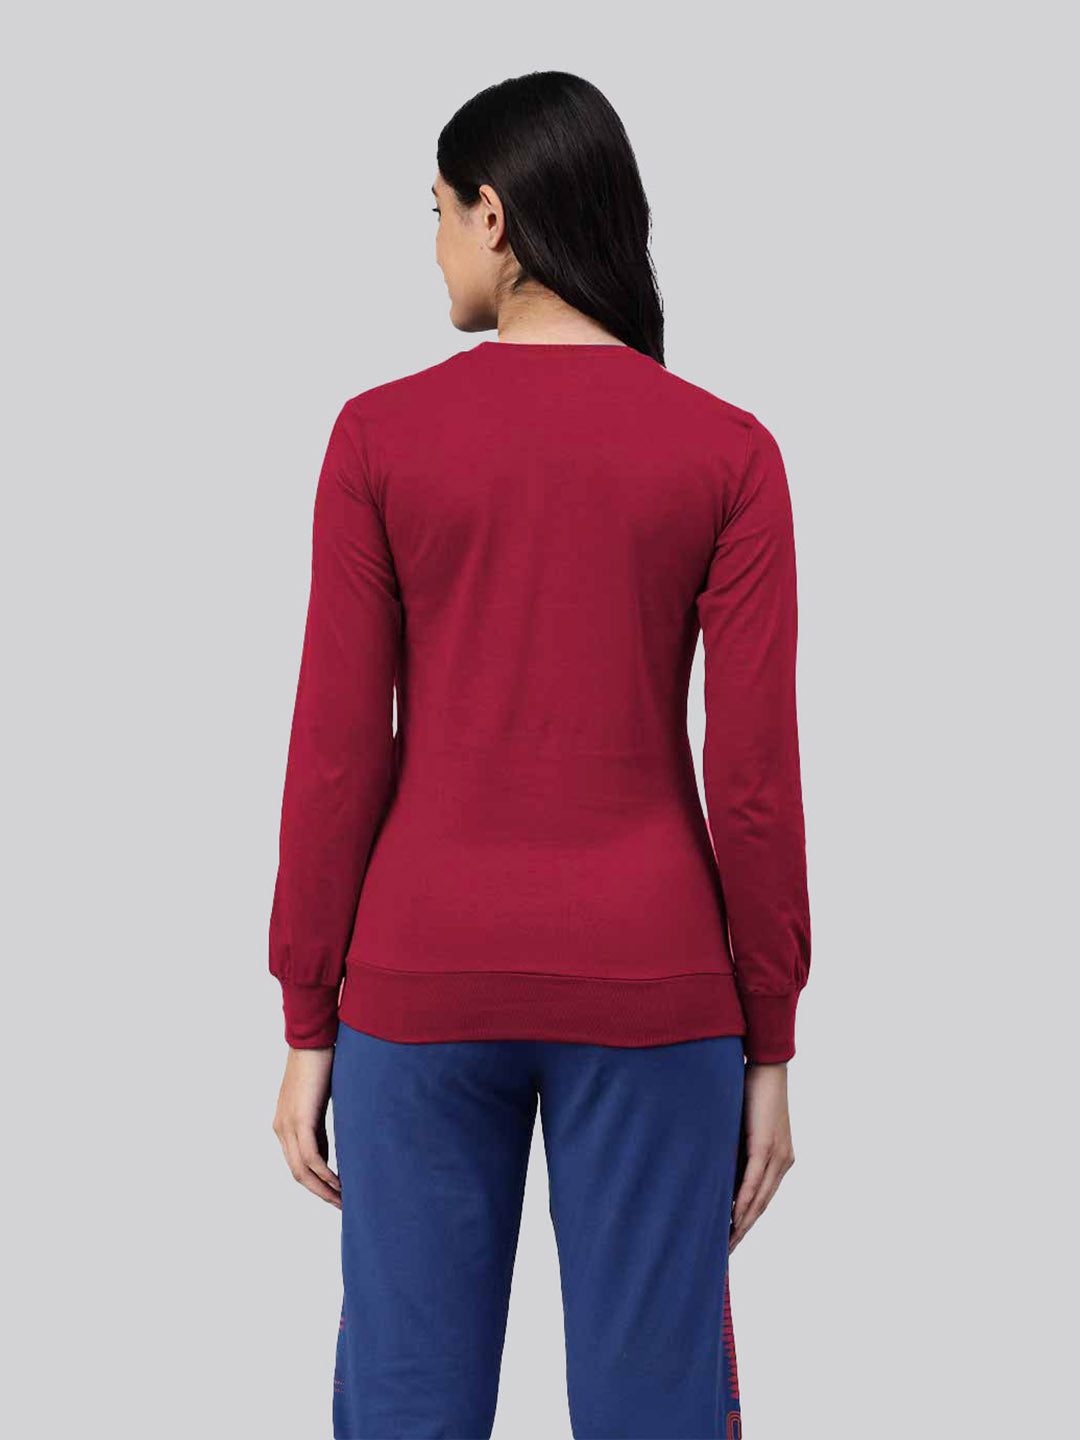 Maroon t shirt for ladies